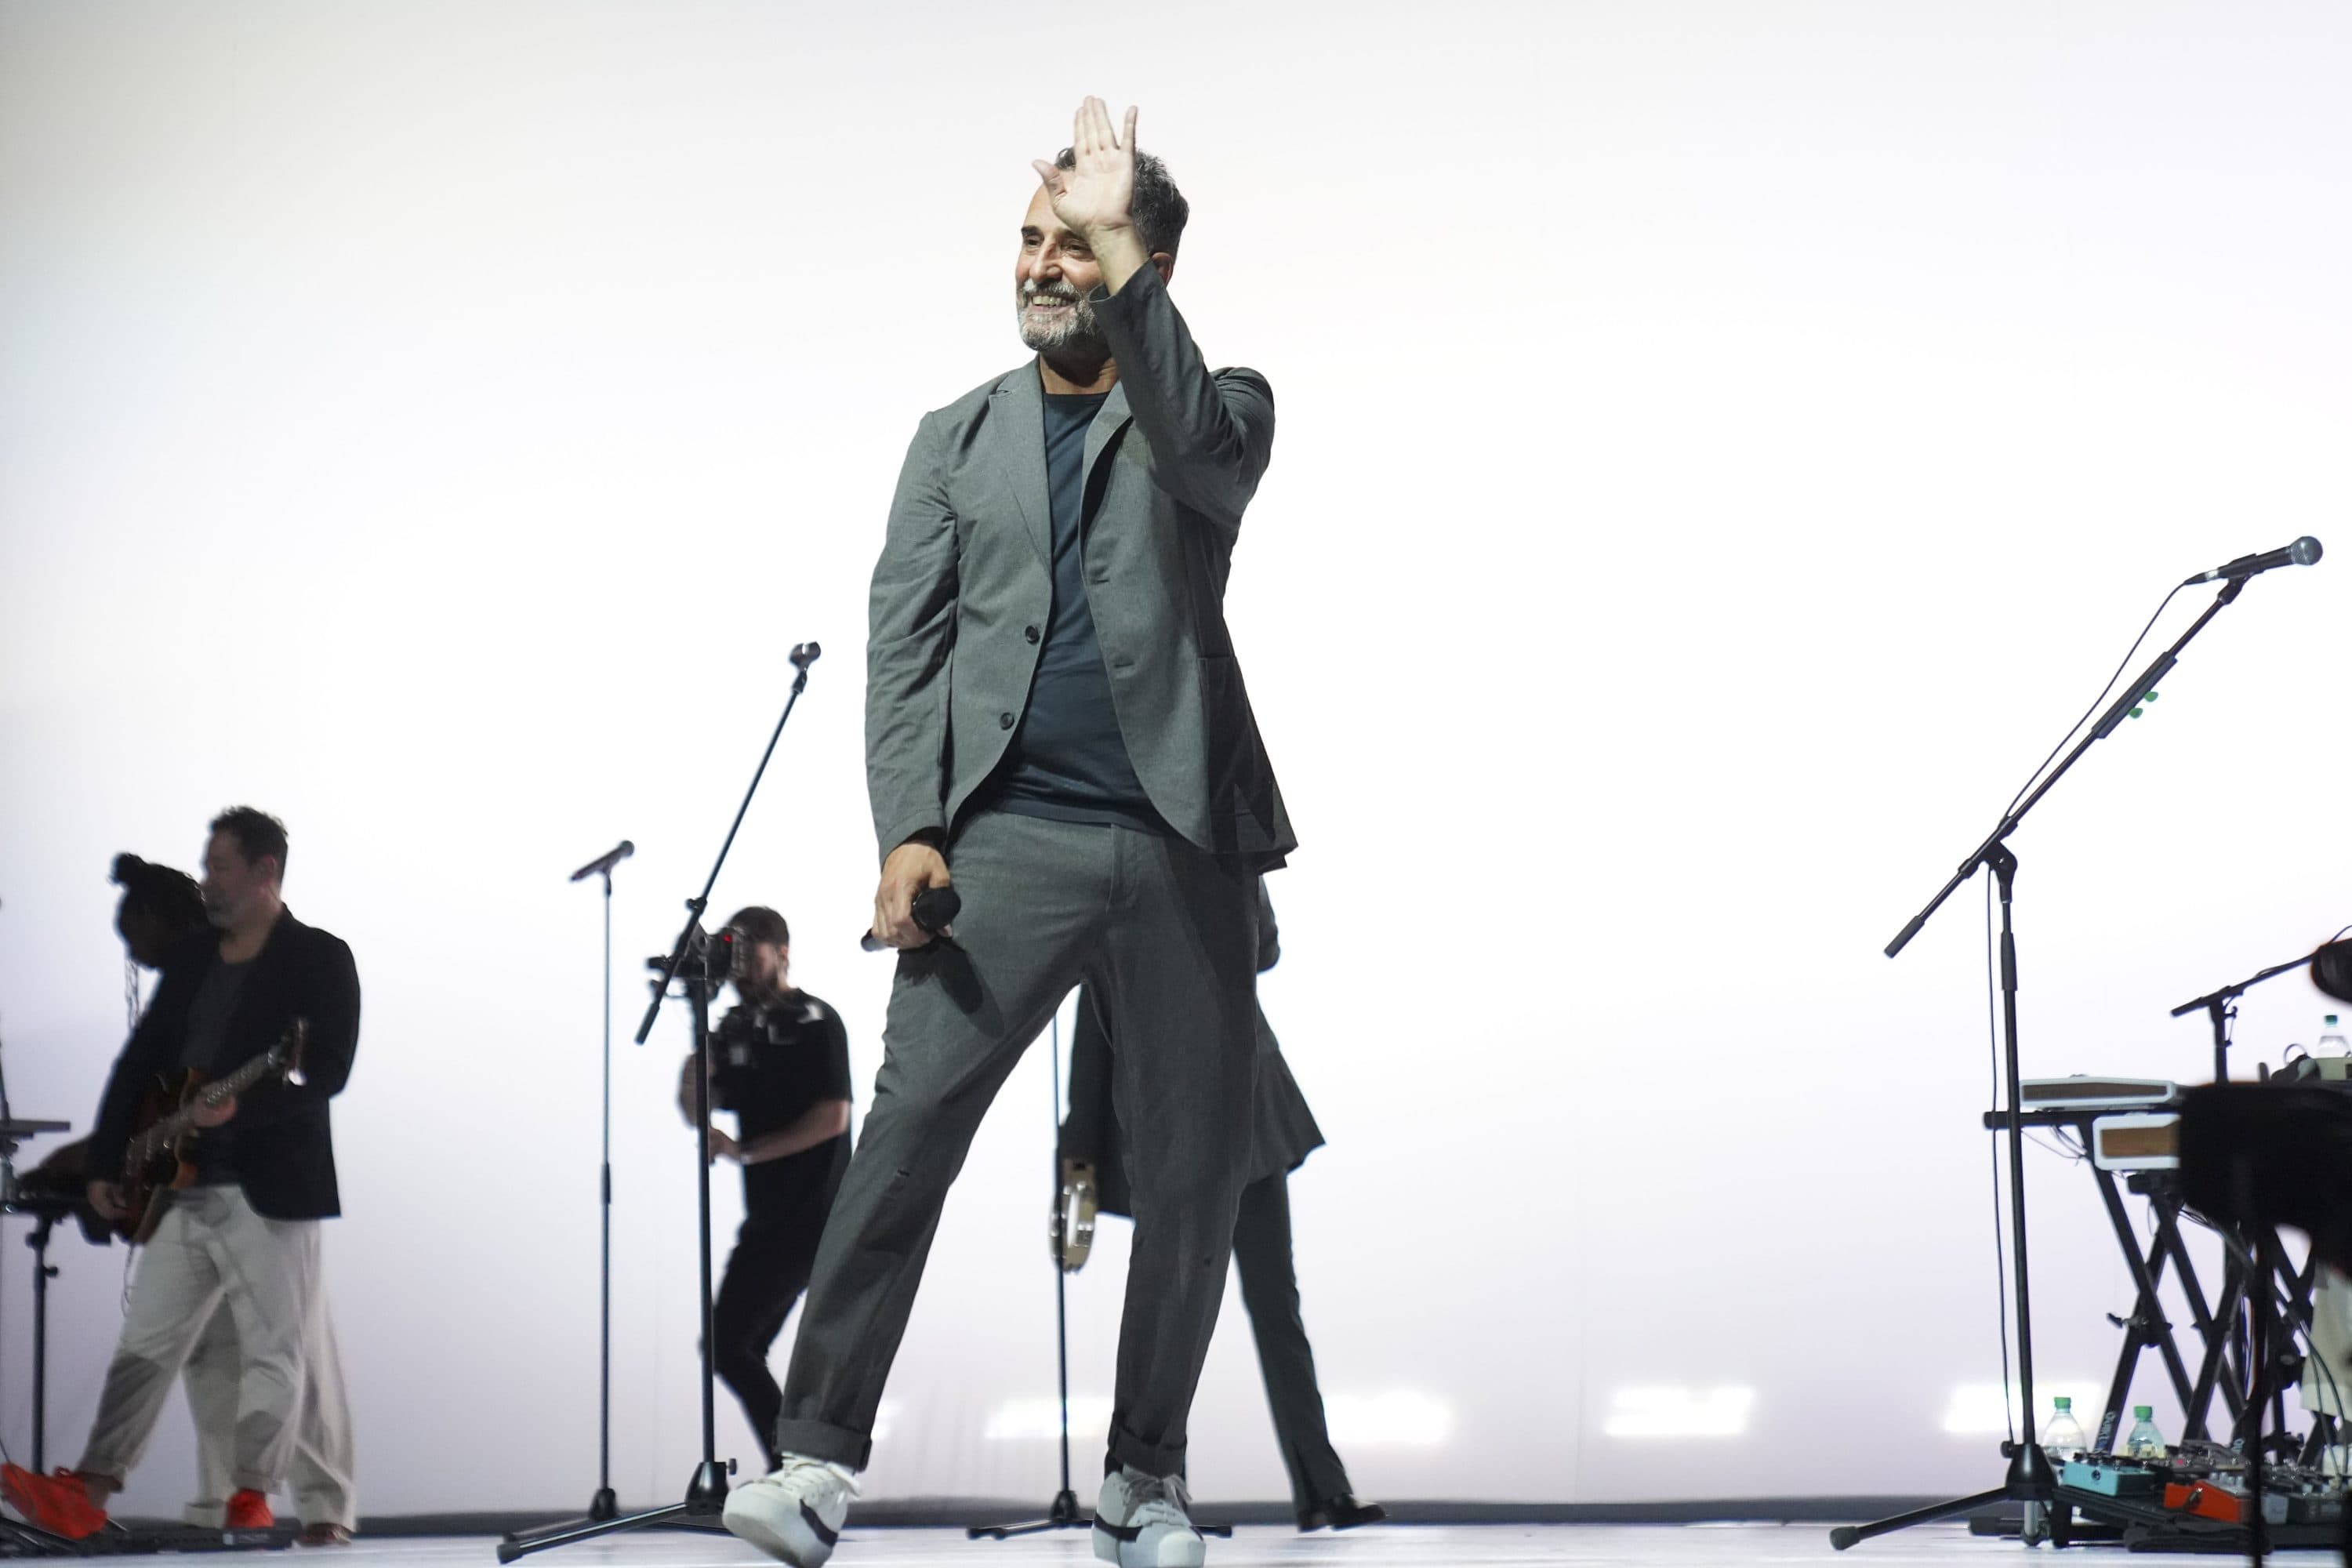 Uruguayan singer Jorge Drexler waves to fans as he performs music from his new album &quot;Tinta y tiempo&quot; in his hometown of Montevideo, Uruguay in September. (Matilde Campodonico/AP)